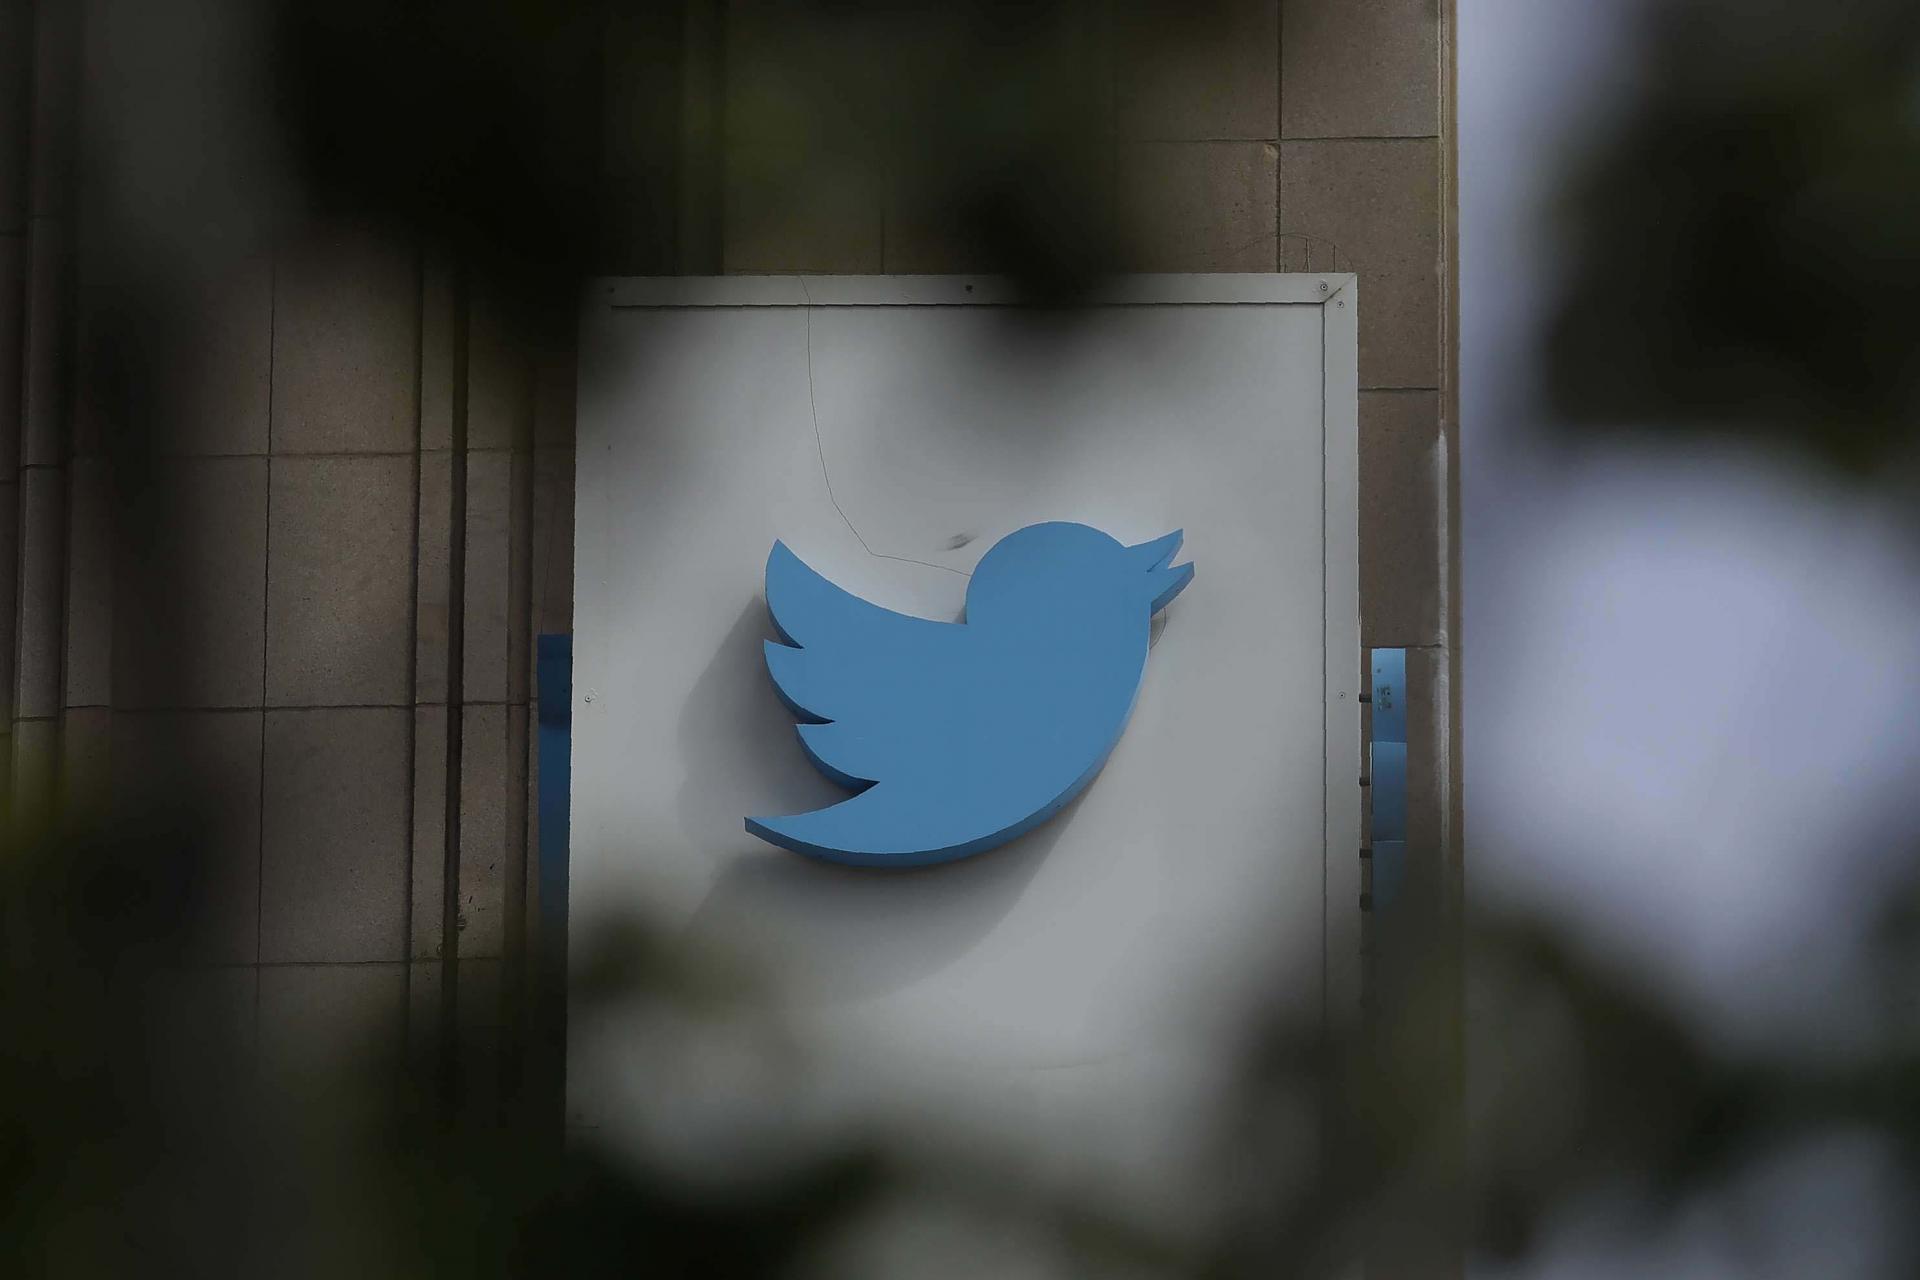 The The two former Twitter employees were given cash and other rewards